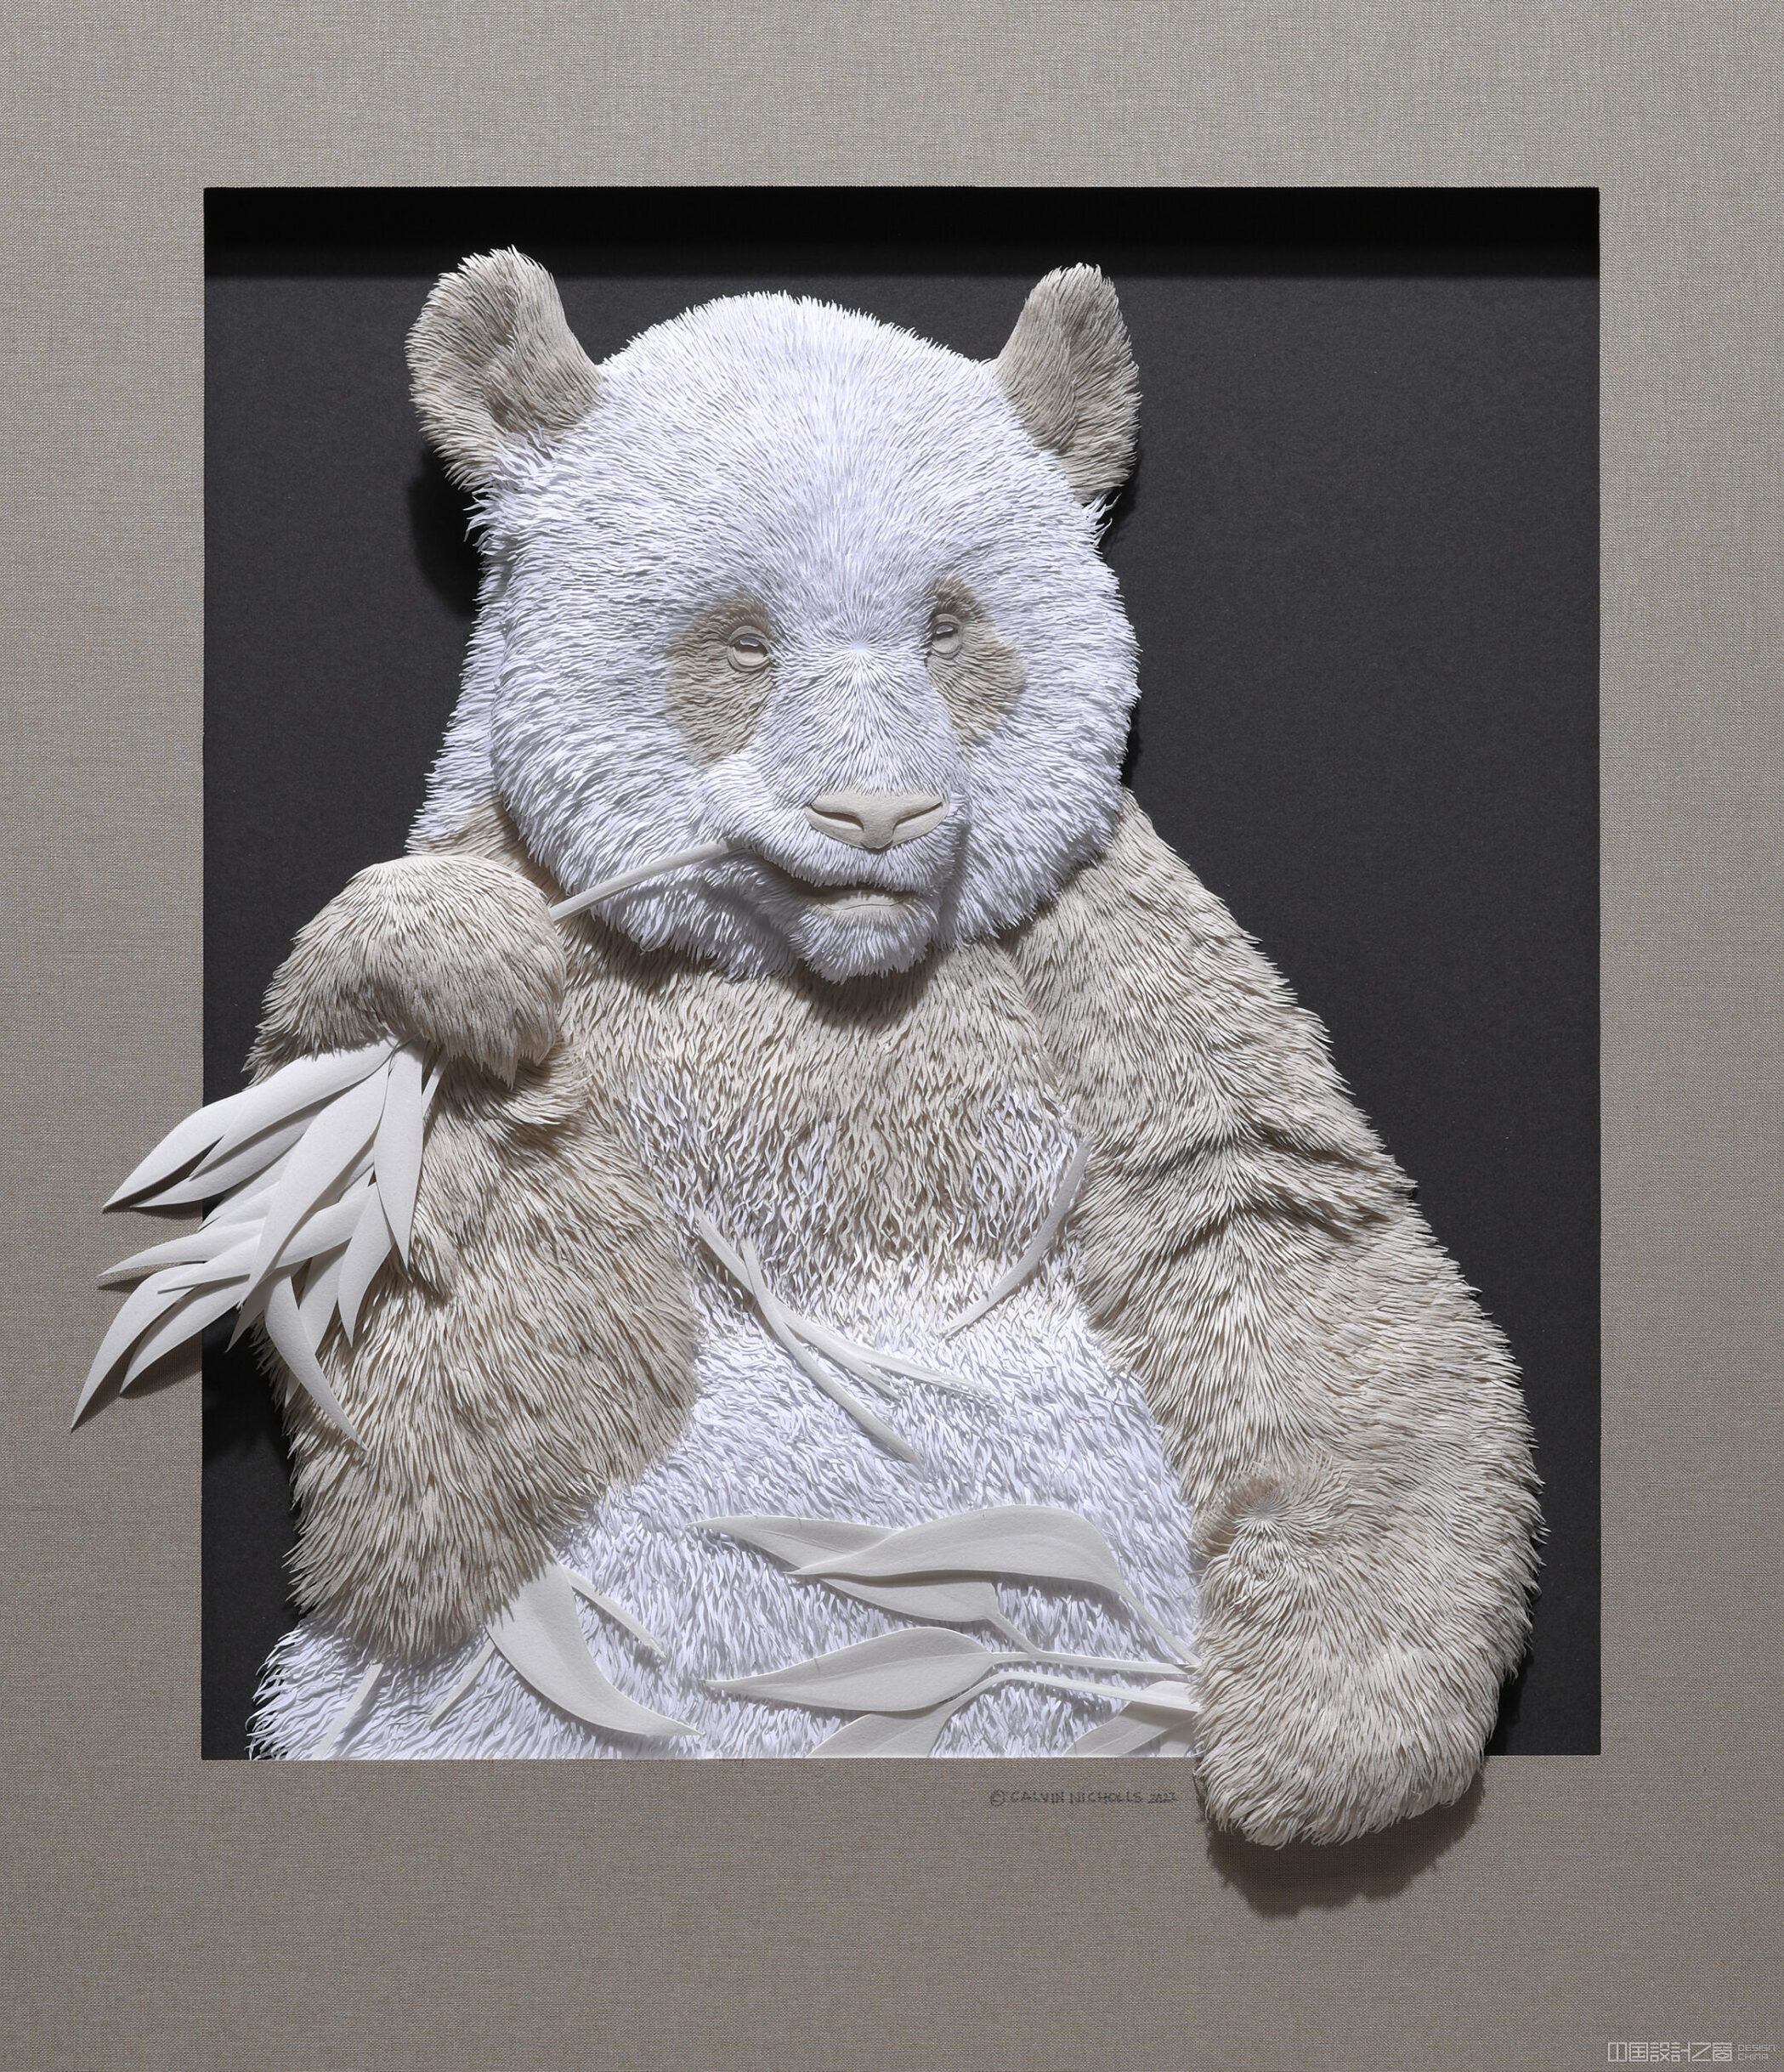 A sculpture of a panda made from paper.